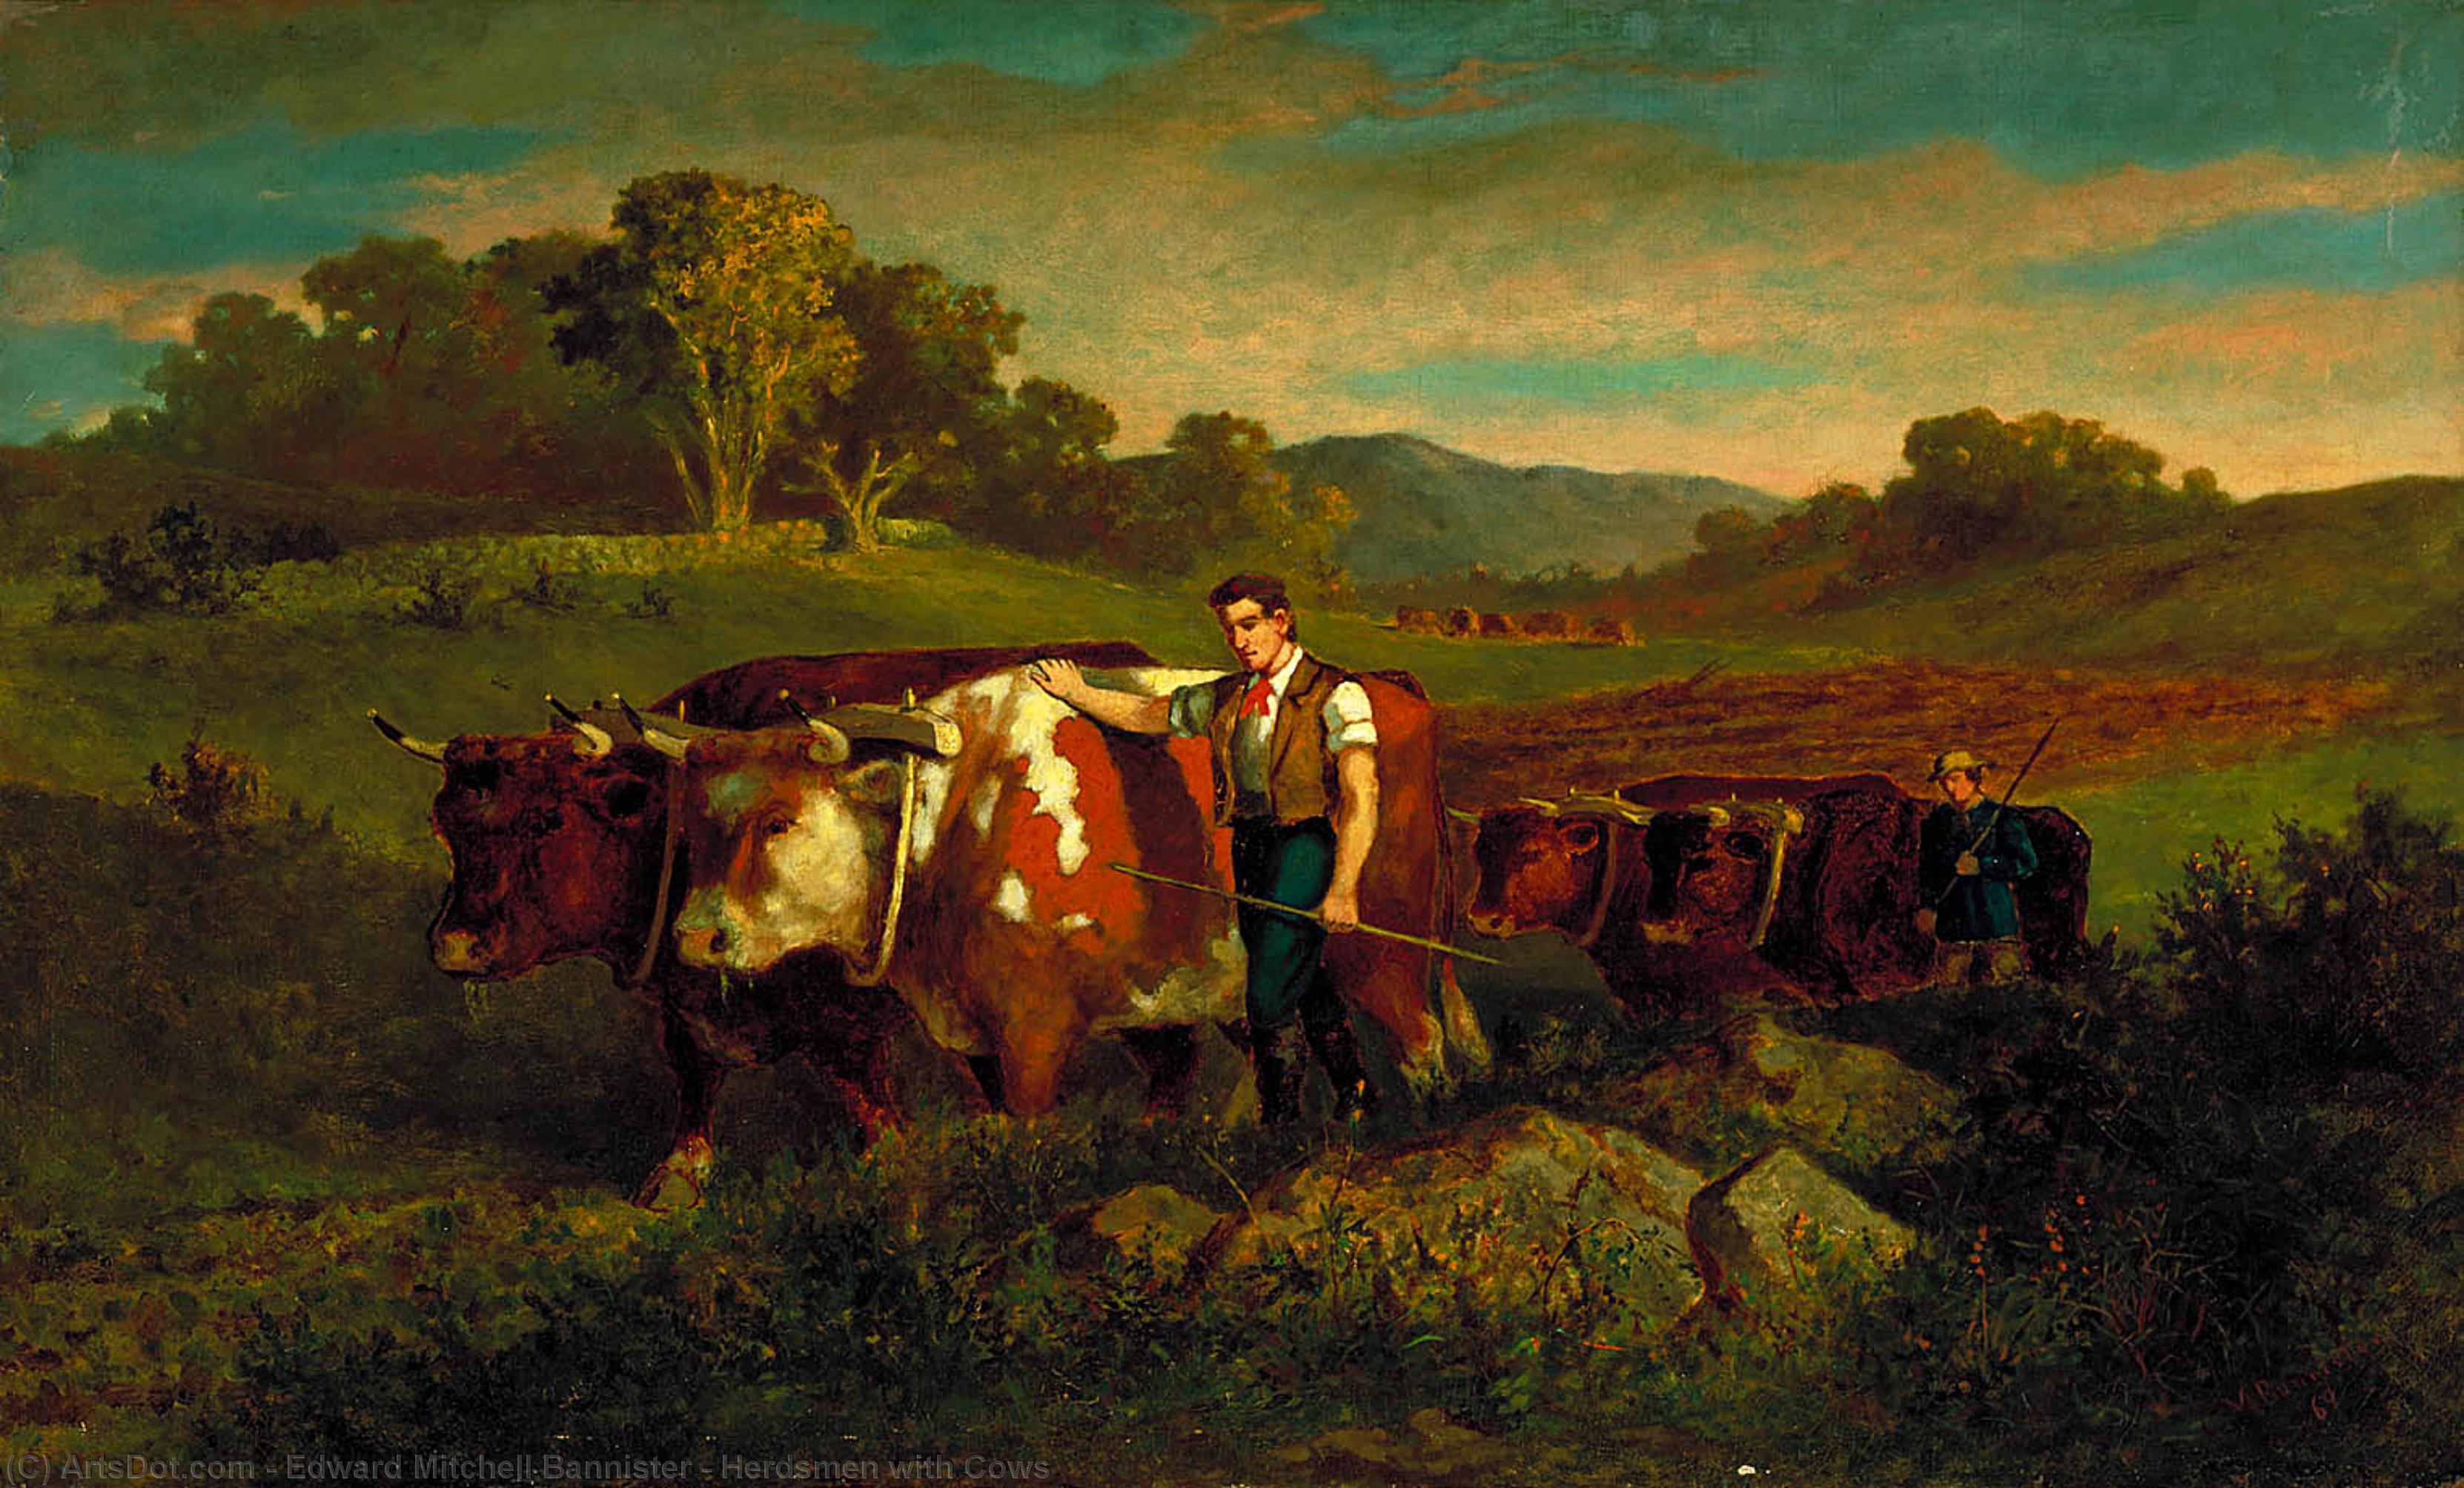 Order Paintings Reproductions Herdsmen with Cows, 1869 by Edward Mitchell Bannister (1828-1901, Canada) | ArtsDot.com